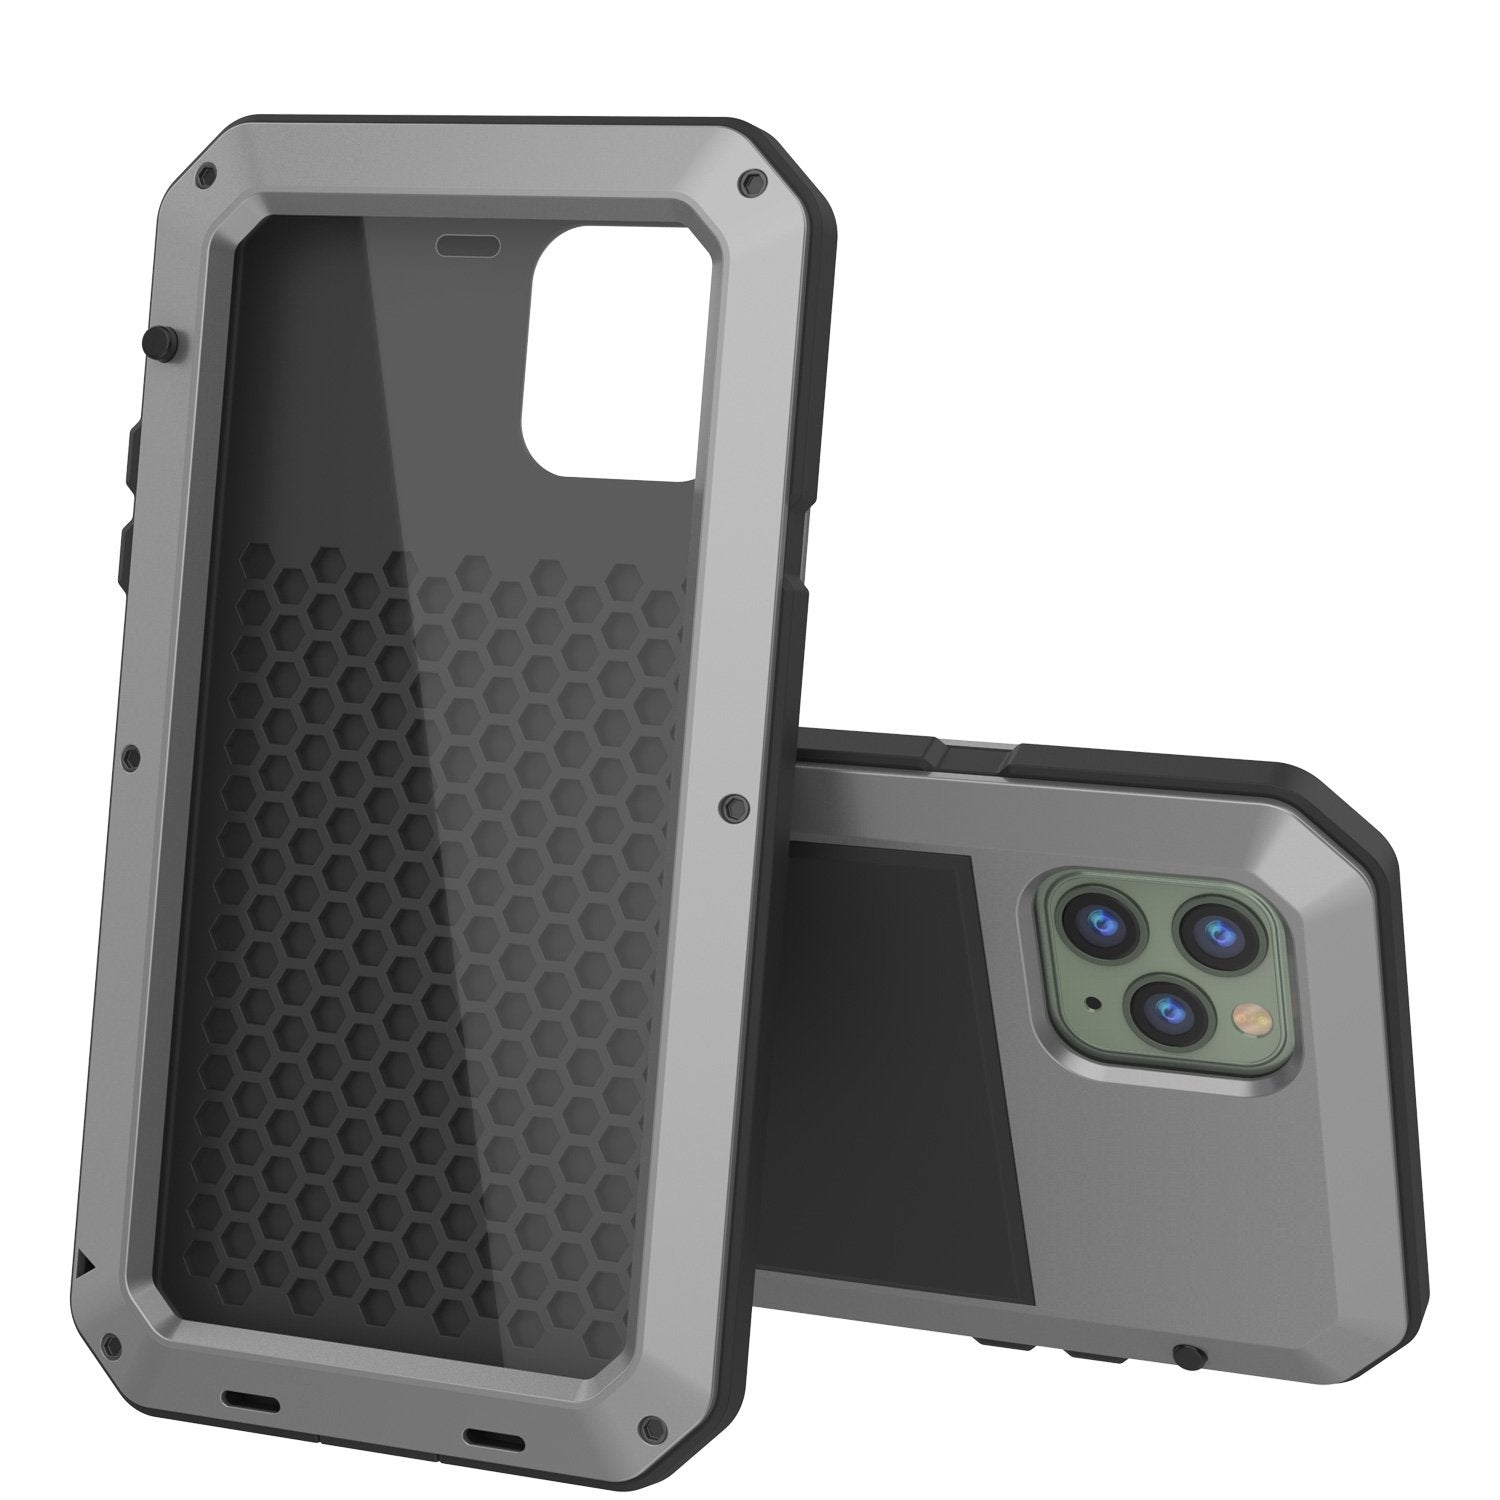 iPhone 11 Pro Max Metal Case, Heavy Duty Military Grade Armor Cover [shock proof] Full Body Hard [Silver]